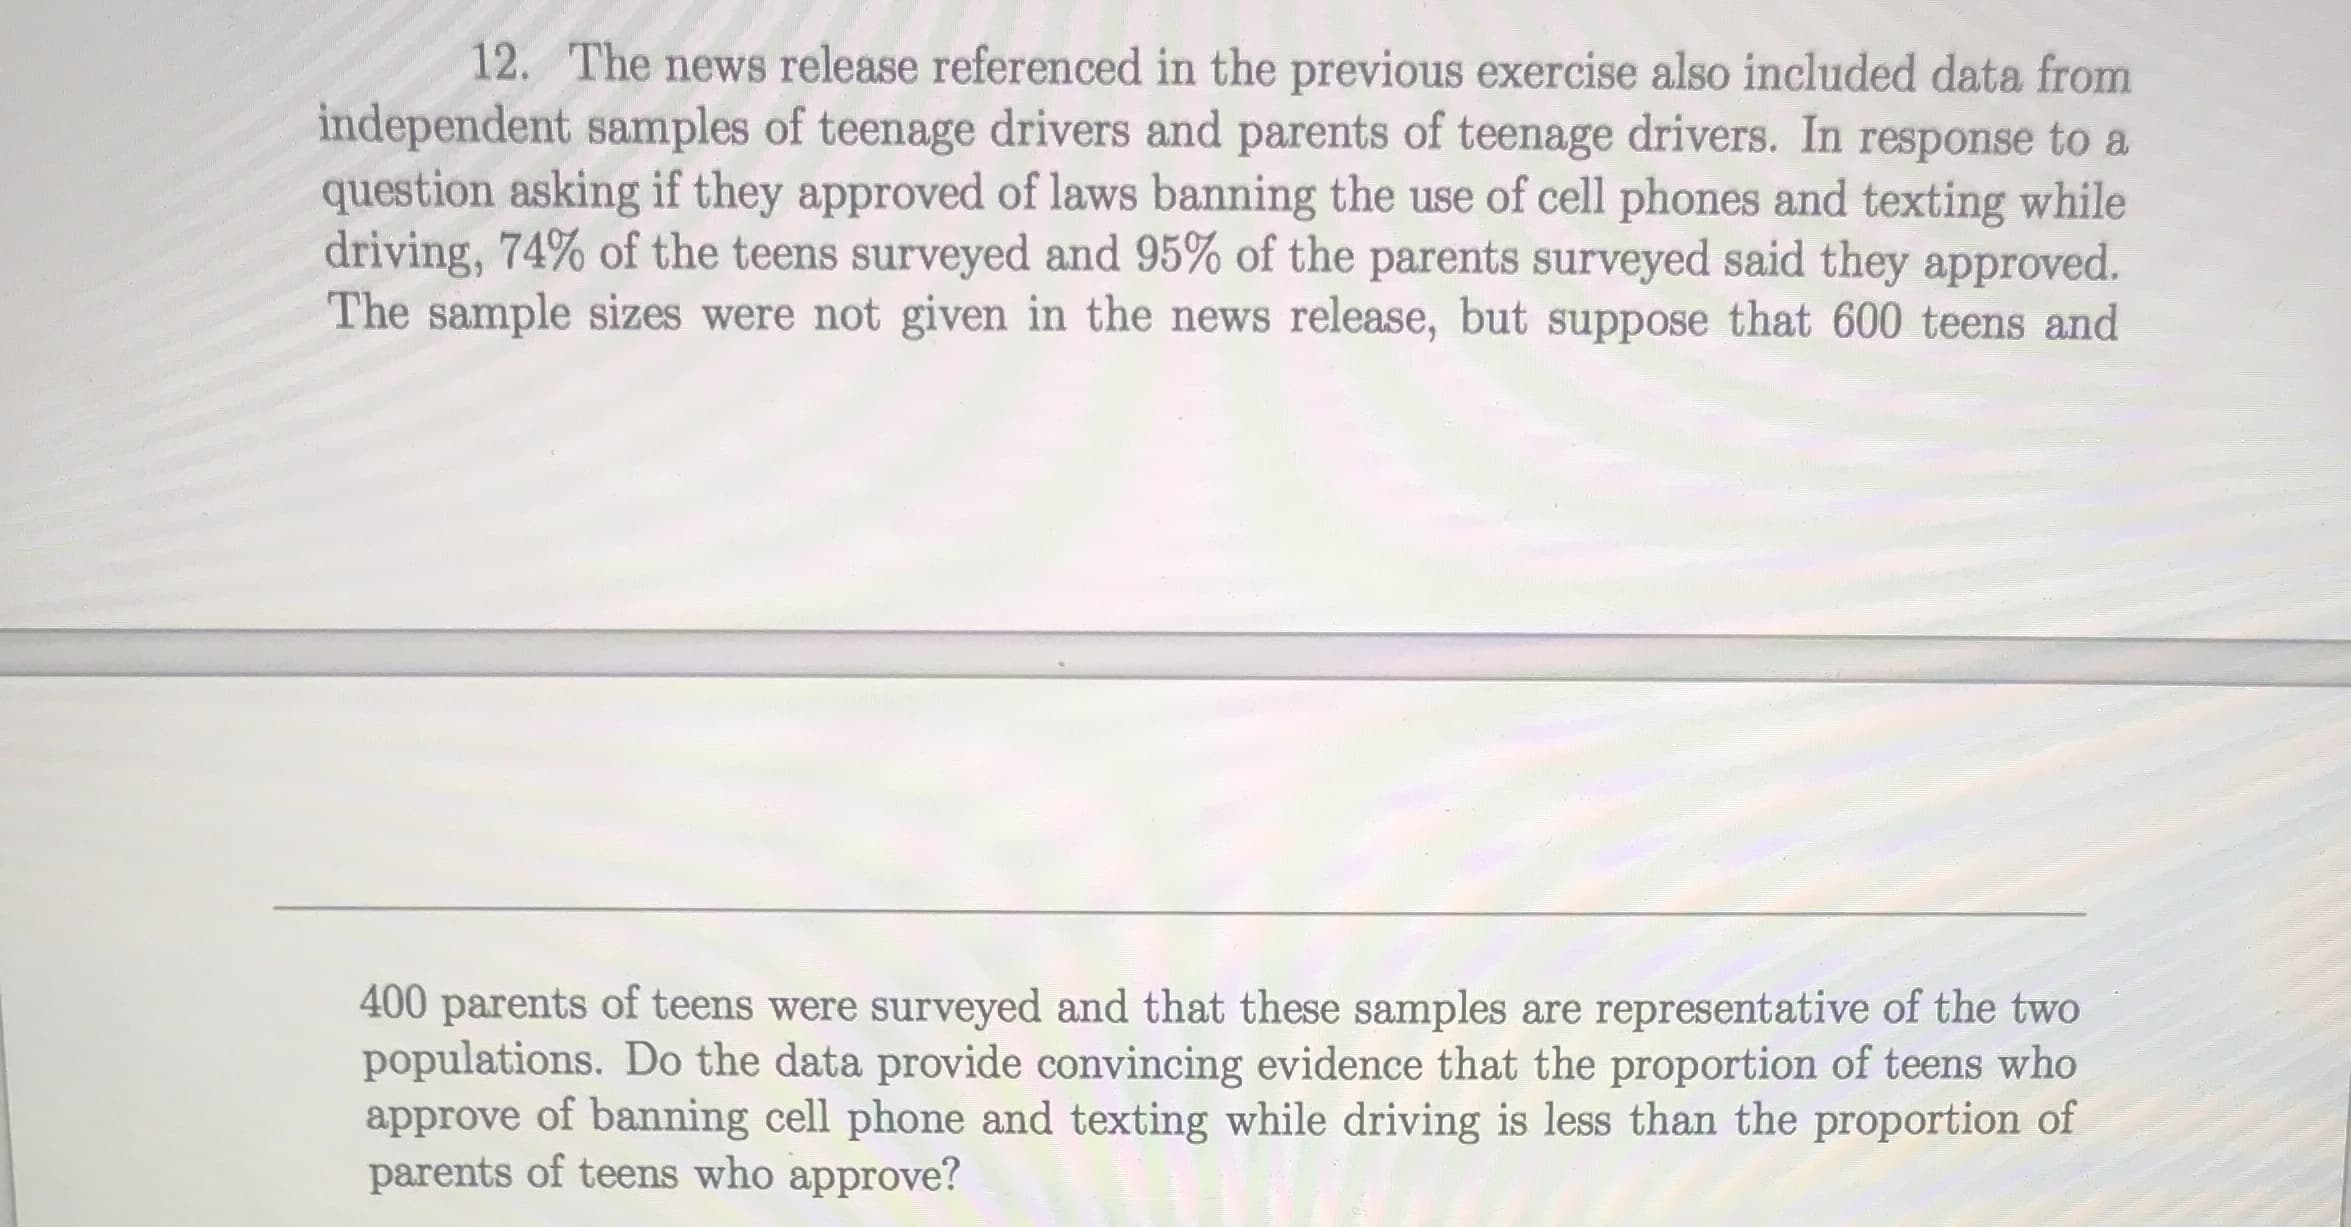 12. The news release referenced in the previous exercise also included data from
independent samples of teenage drivers and parents of teenage drivers. In response to a
question asking if they approved of laws banning the use of cell phones and texting while
driving, 74% of the teens surveyed and 95% of the parents surveyed said they approved.
The sample sizes were not given in the news release, but suppose that 600 teens and
400 parents of teens were surveyed and that these samples are representative of the two
populations. Do the data provide convincing evidence that the proportion of teens who
approve of banning cell phone and texting while driving is less than the proportion of
parents of teens who approve?
